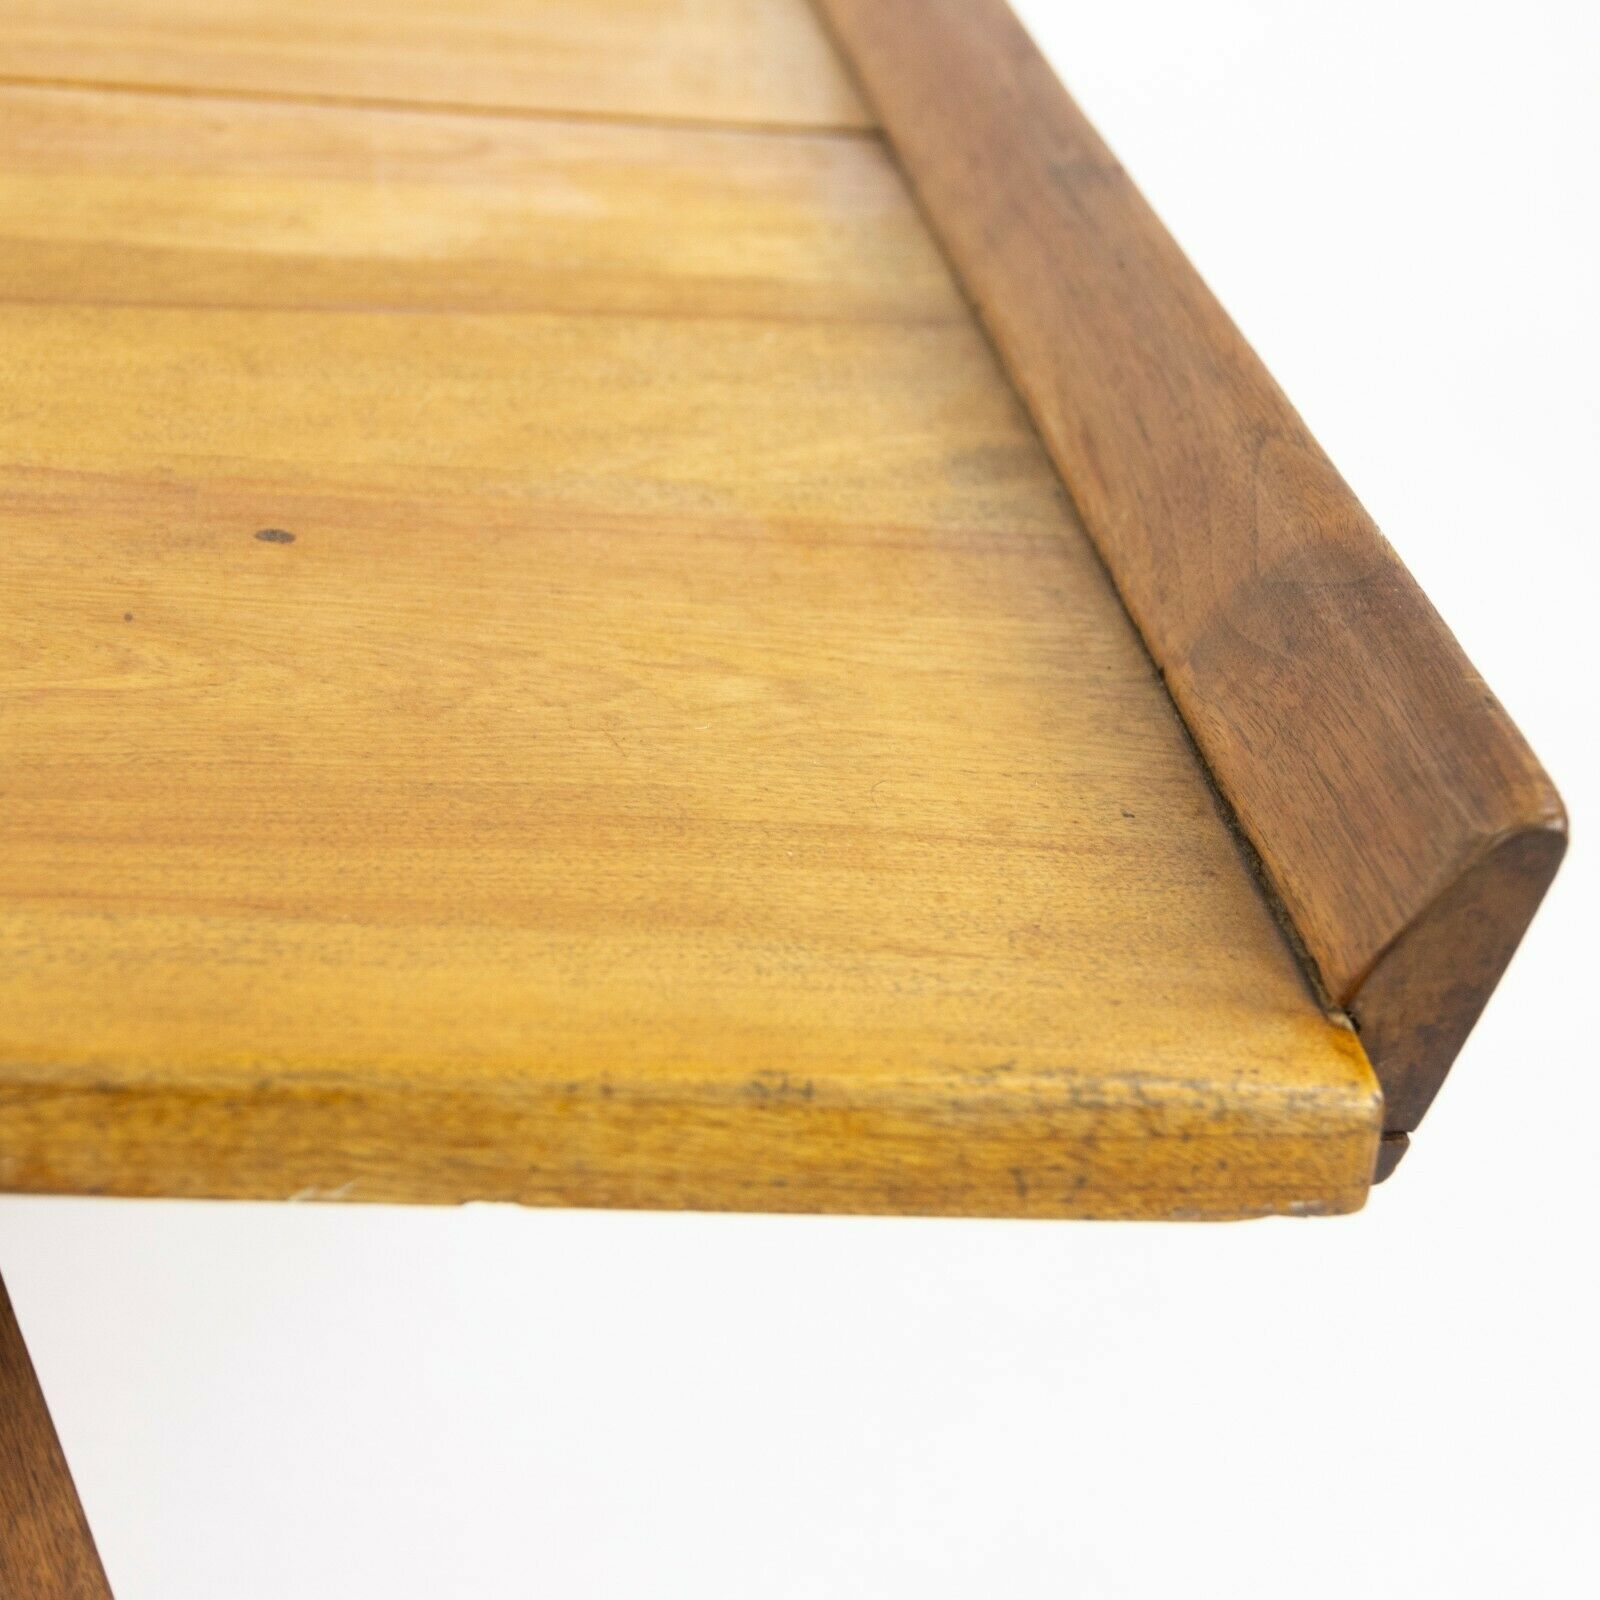 SOLD 1947 George Nakashima for Knoll Associates N10 Coffee Table in Birch and Walnut